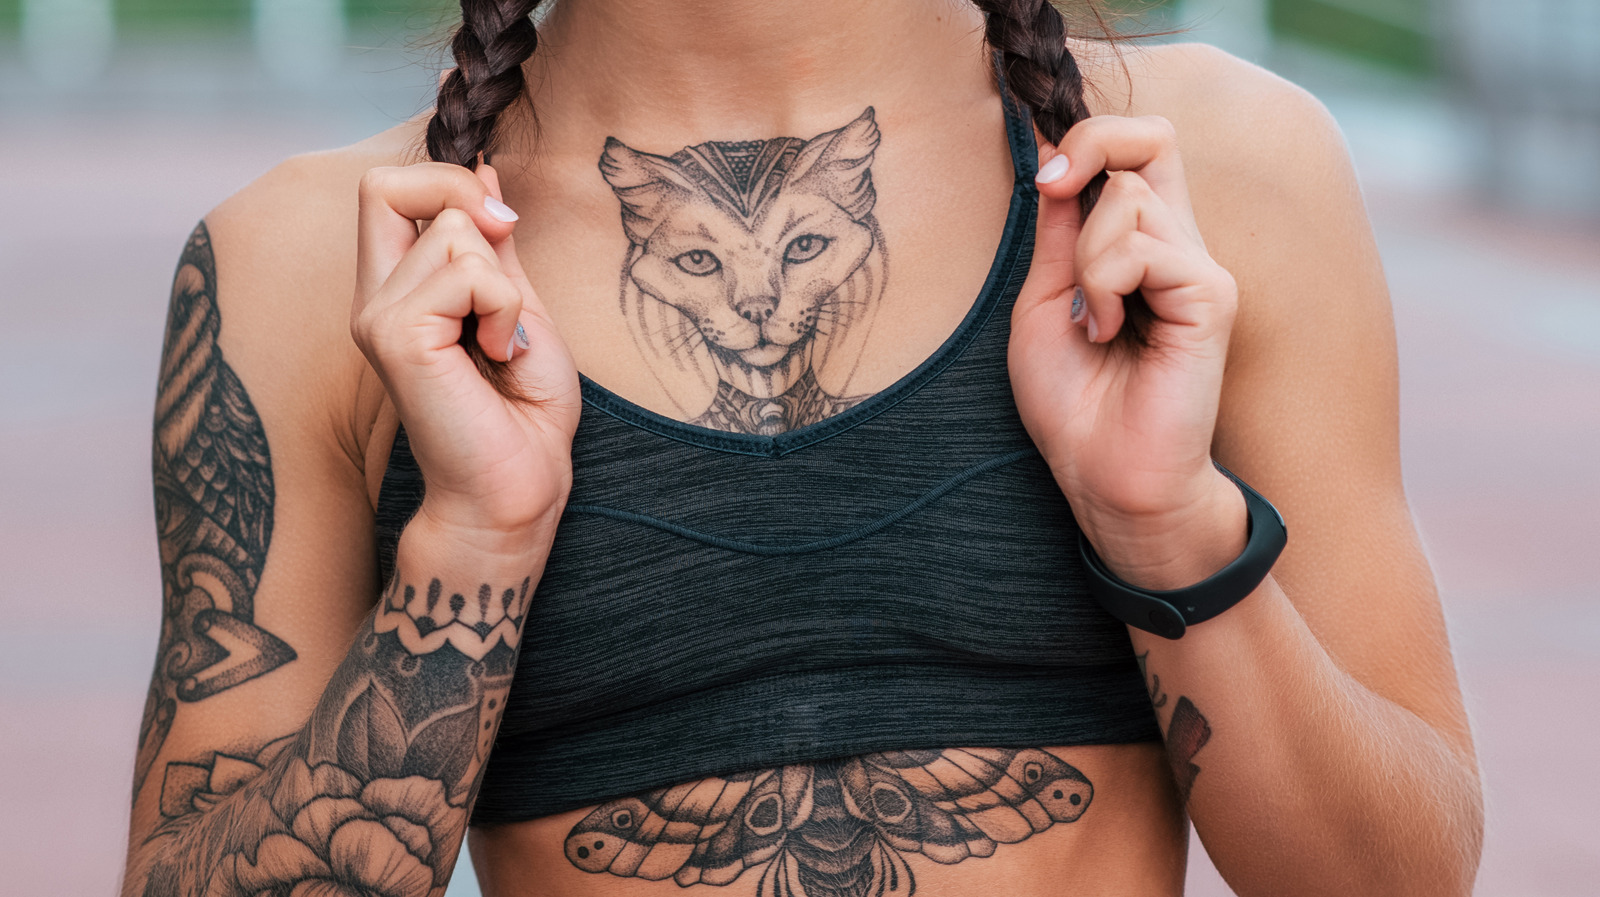 Why don't more women get more tattoos? – This, Tatt, and the Other